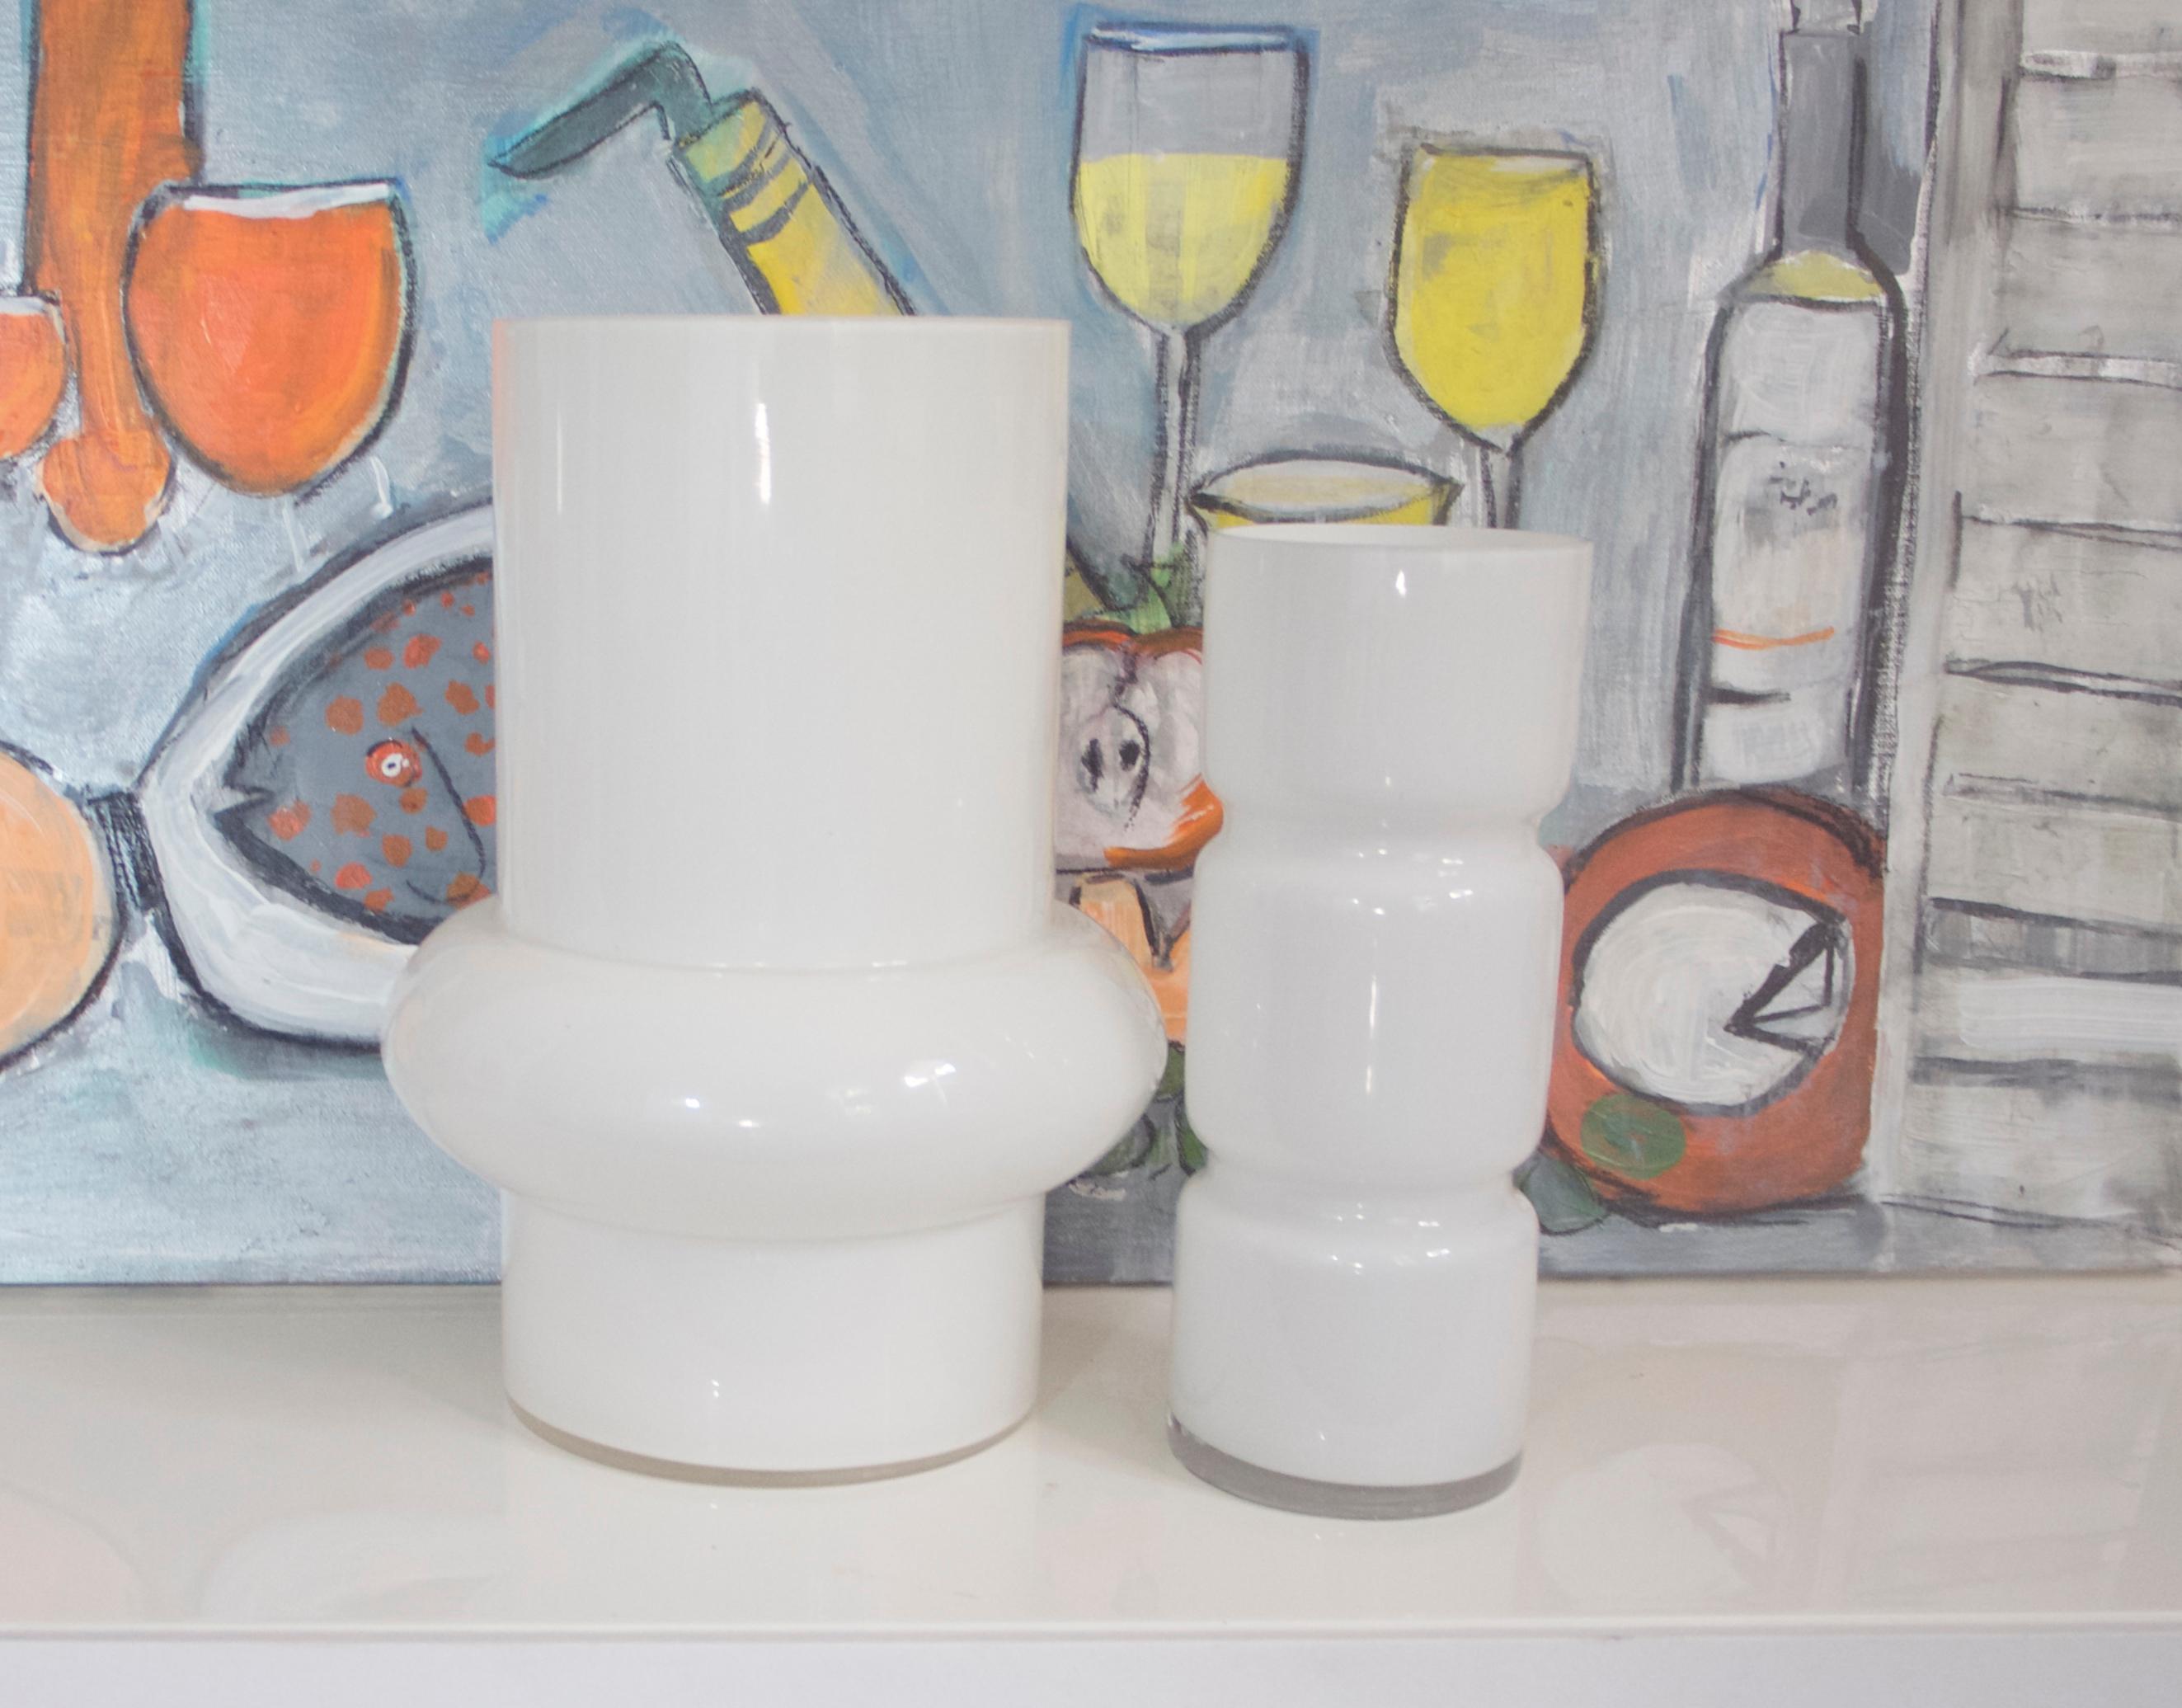 Two modernist Scandinavian Space Age white glass vases from late 1950s-1960s

Large hooped vase - Alsterfors
Measures: Height 32 cms
Diameter 16 cms
Diameter at widest approximately 27 cms
In very good condition commensurate with